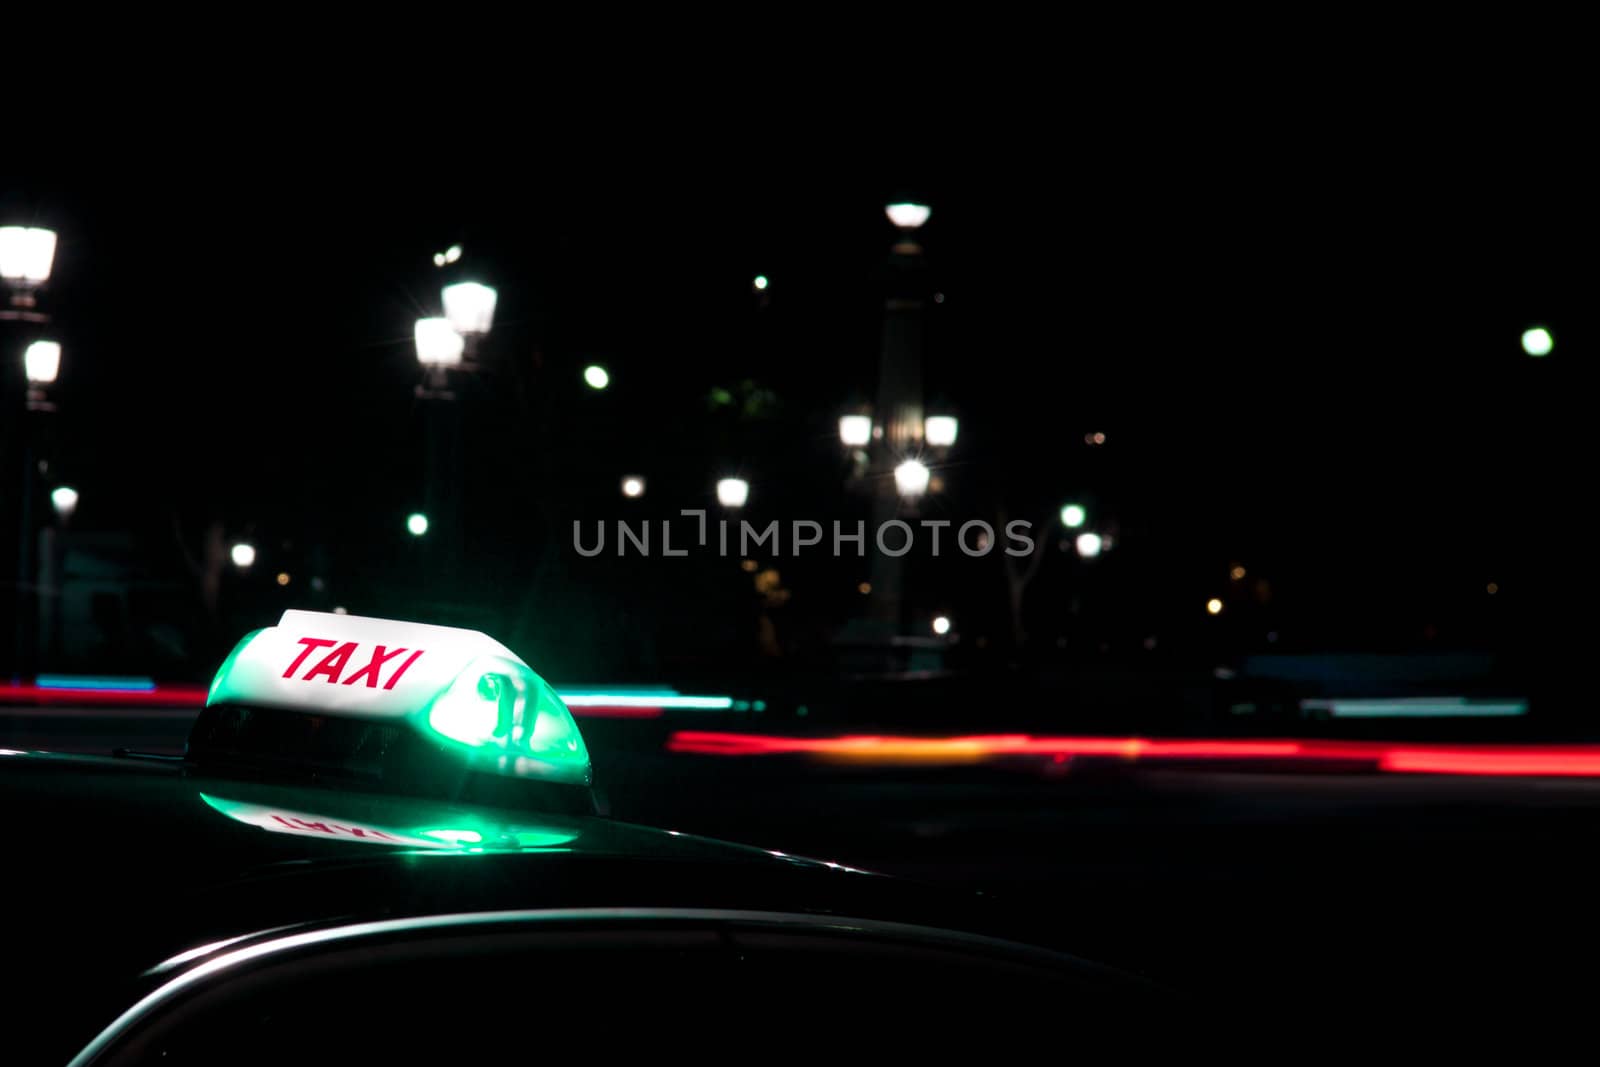 At night it is always safer to get a taxi. Night shot of taxi sign, taken at Place Concorde, Paris.